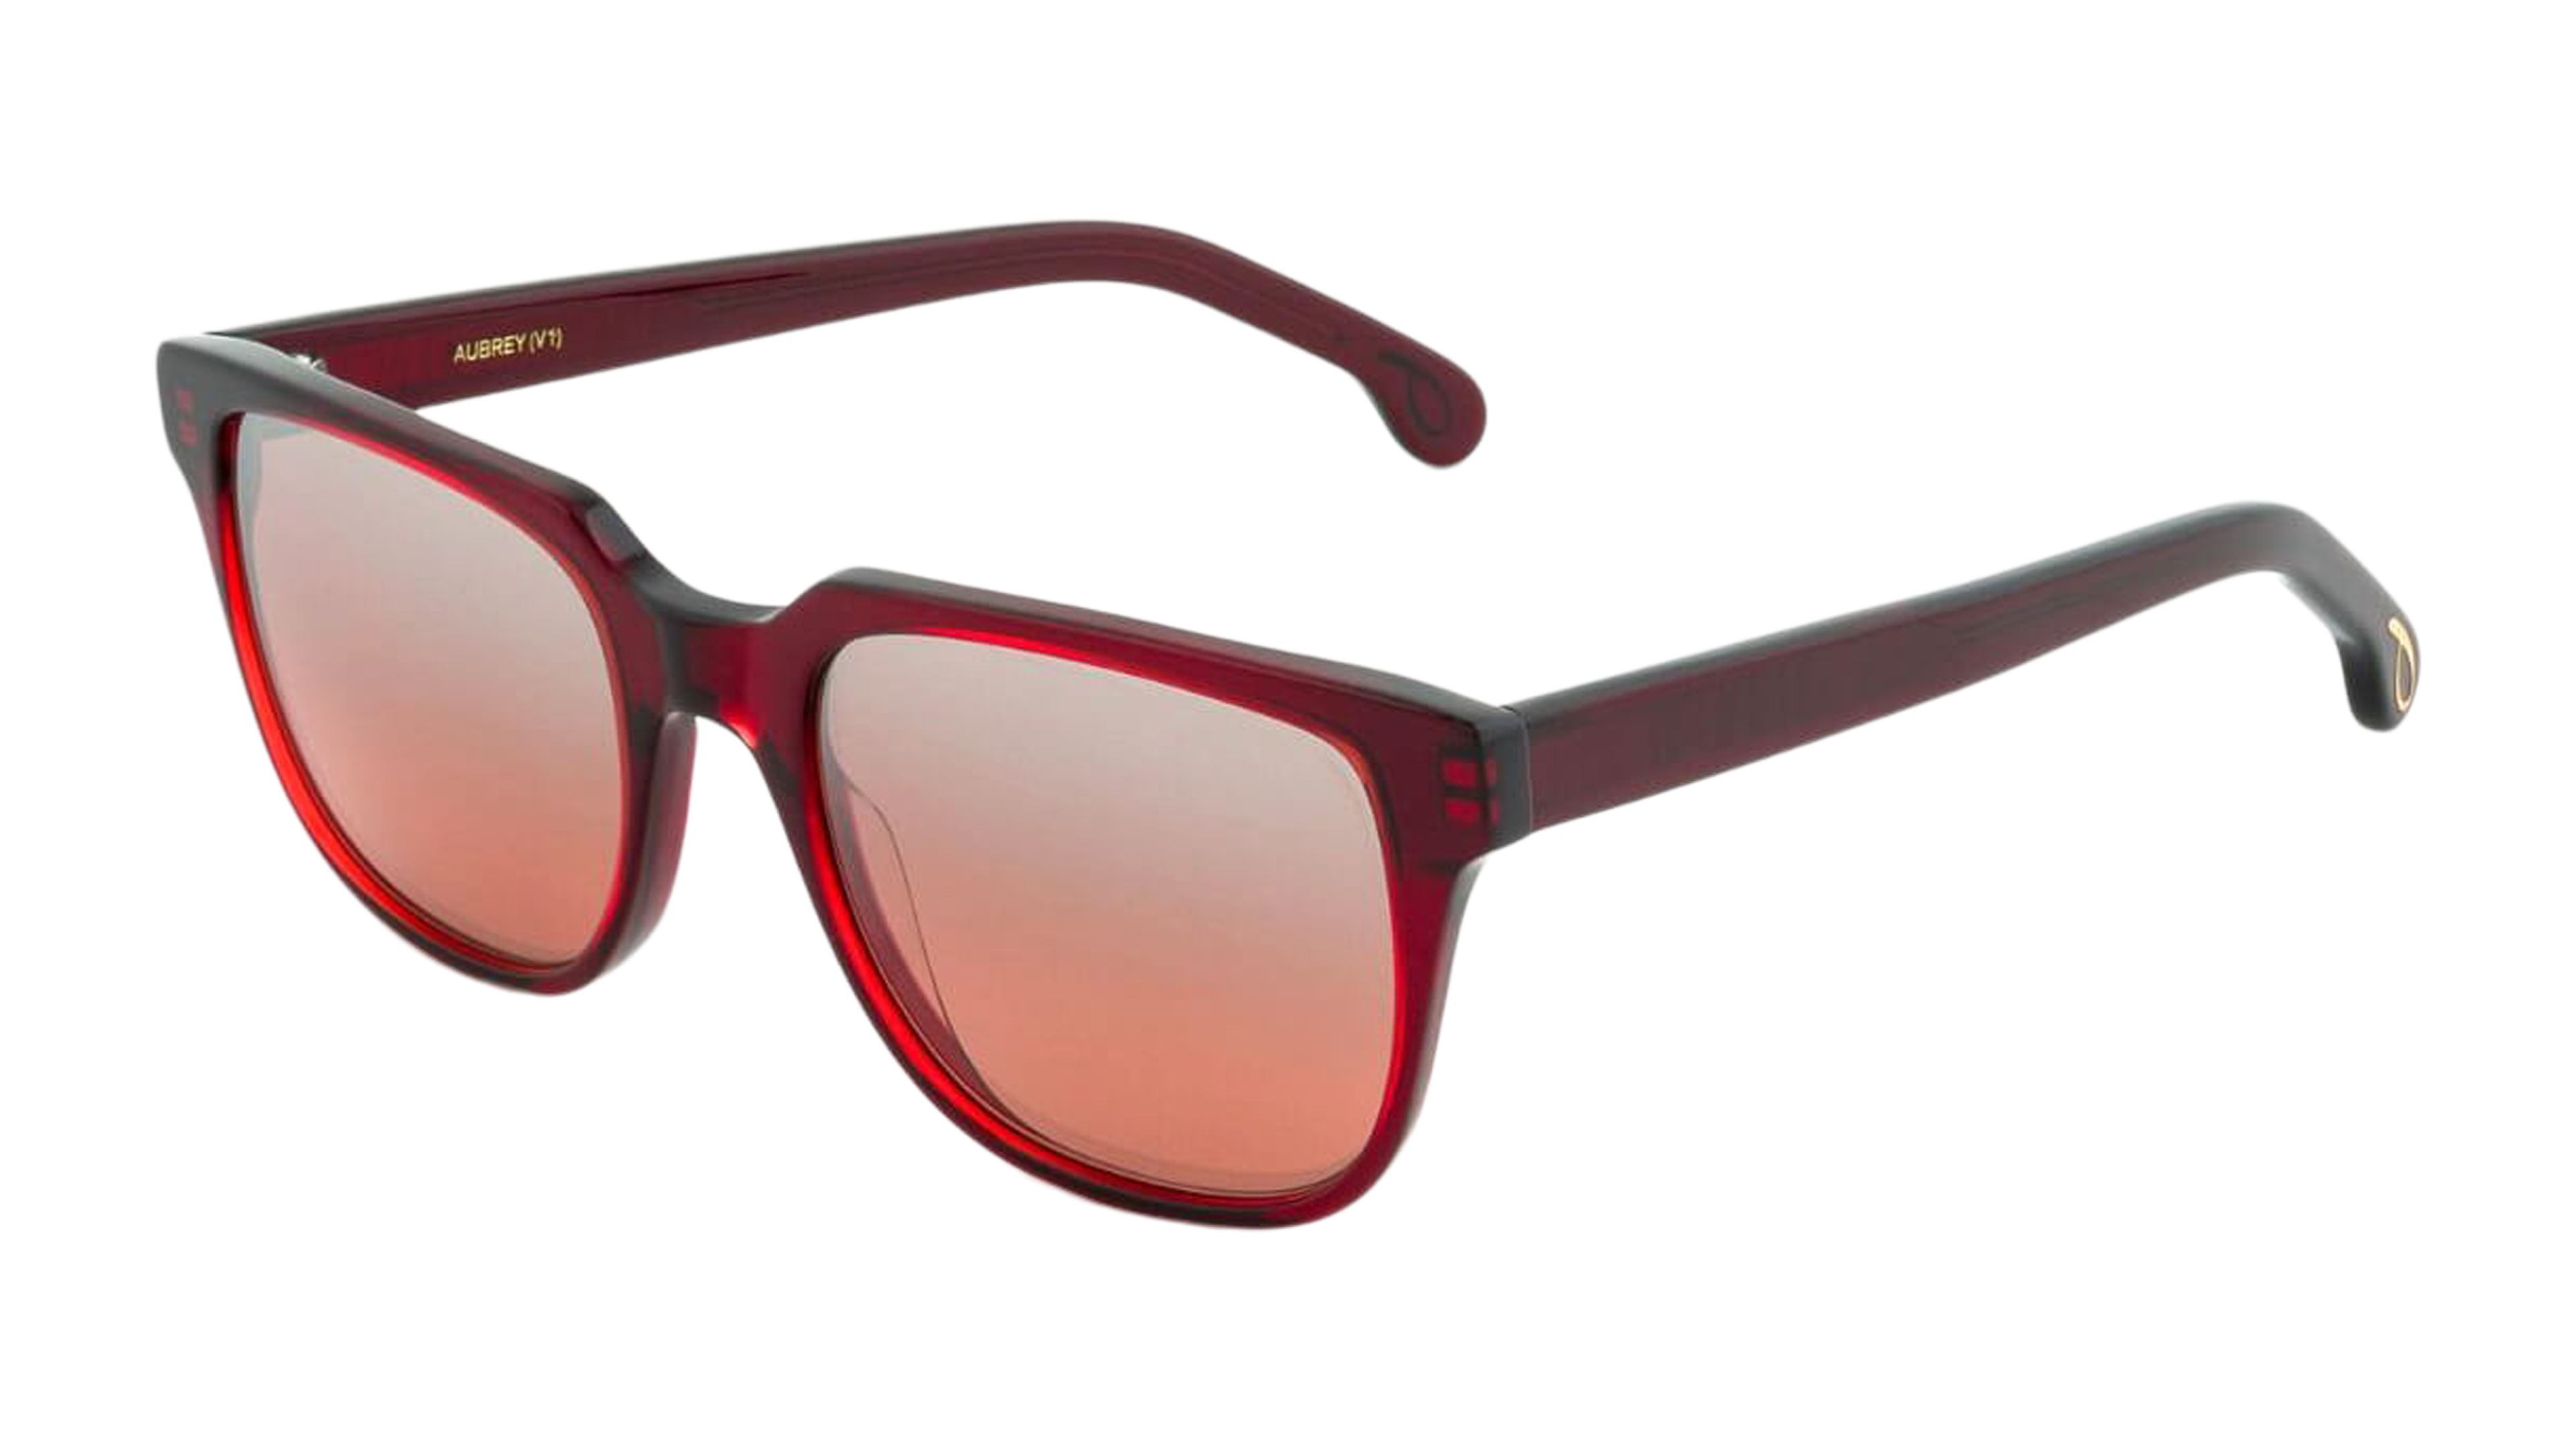 Angle_Left01 Paul Smith Aubrey PS SP010 (03) Sunglasses Red / Red